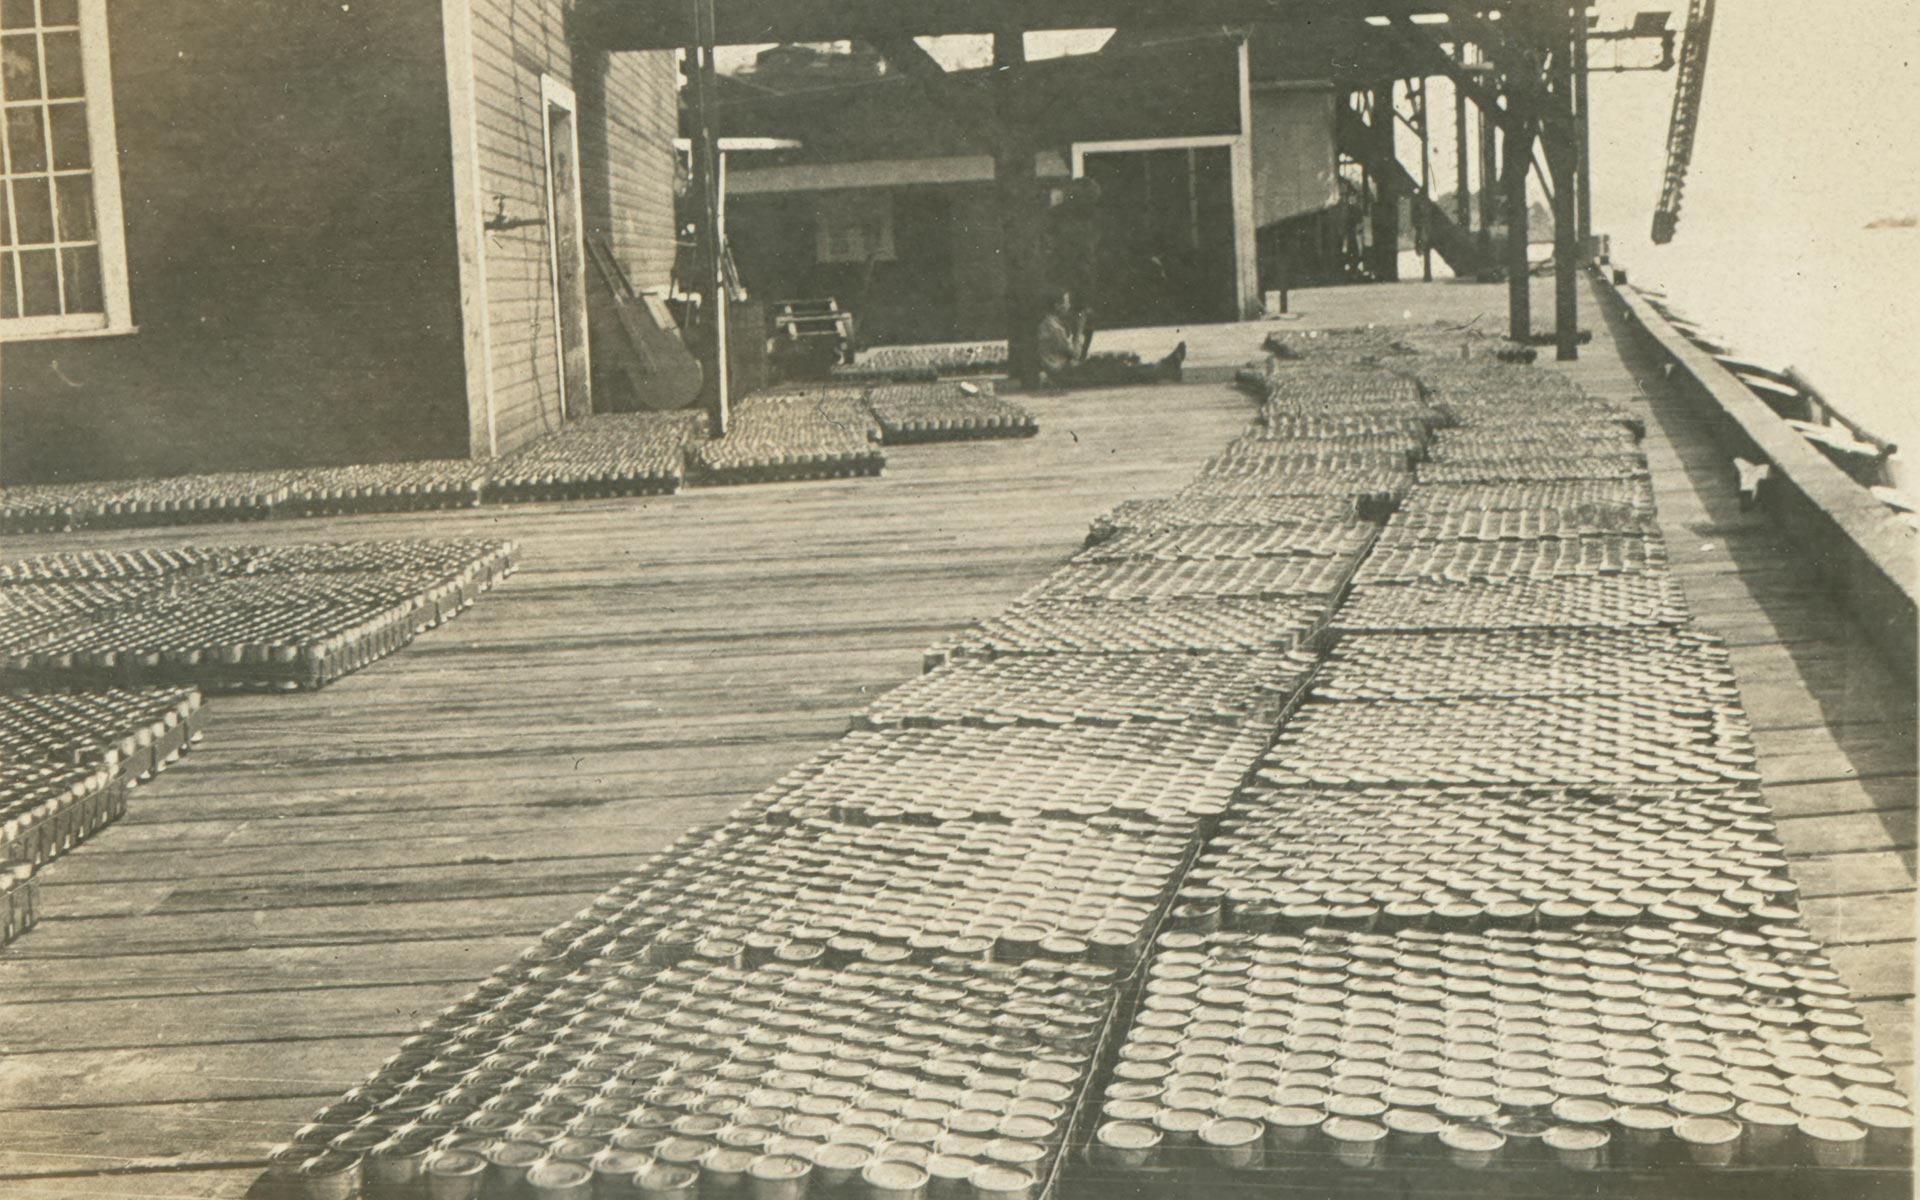 Cannery dock with rows of trays full of canned salmon.